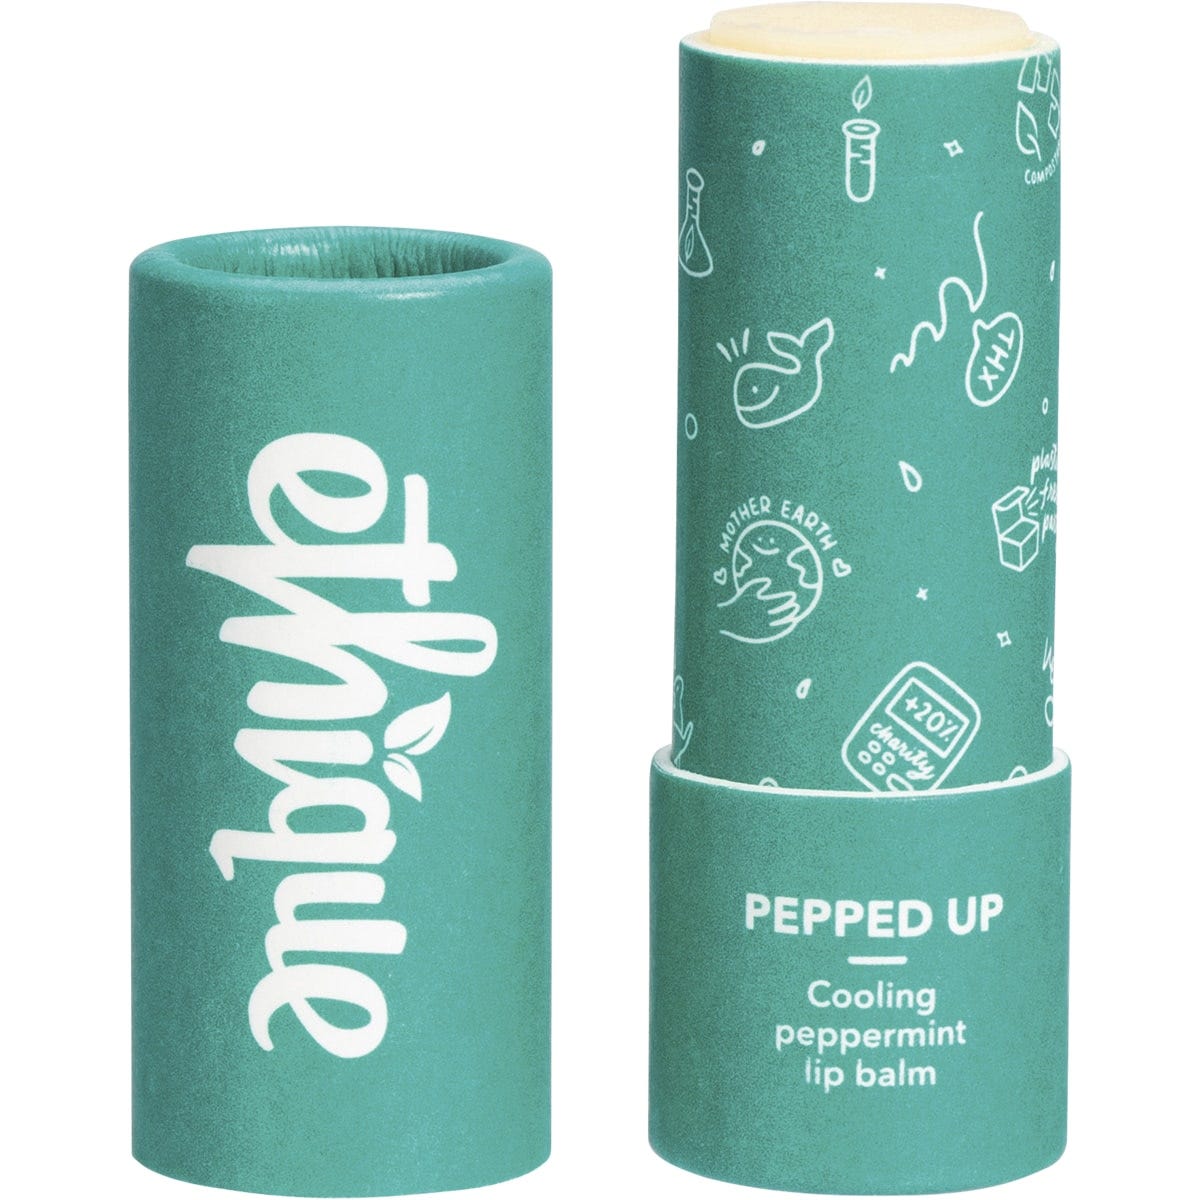 Ethique Lip Balm Pepped Up Peppermint